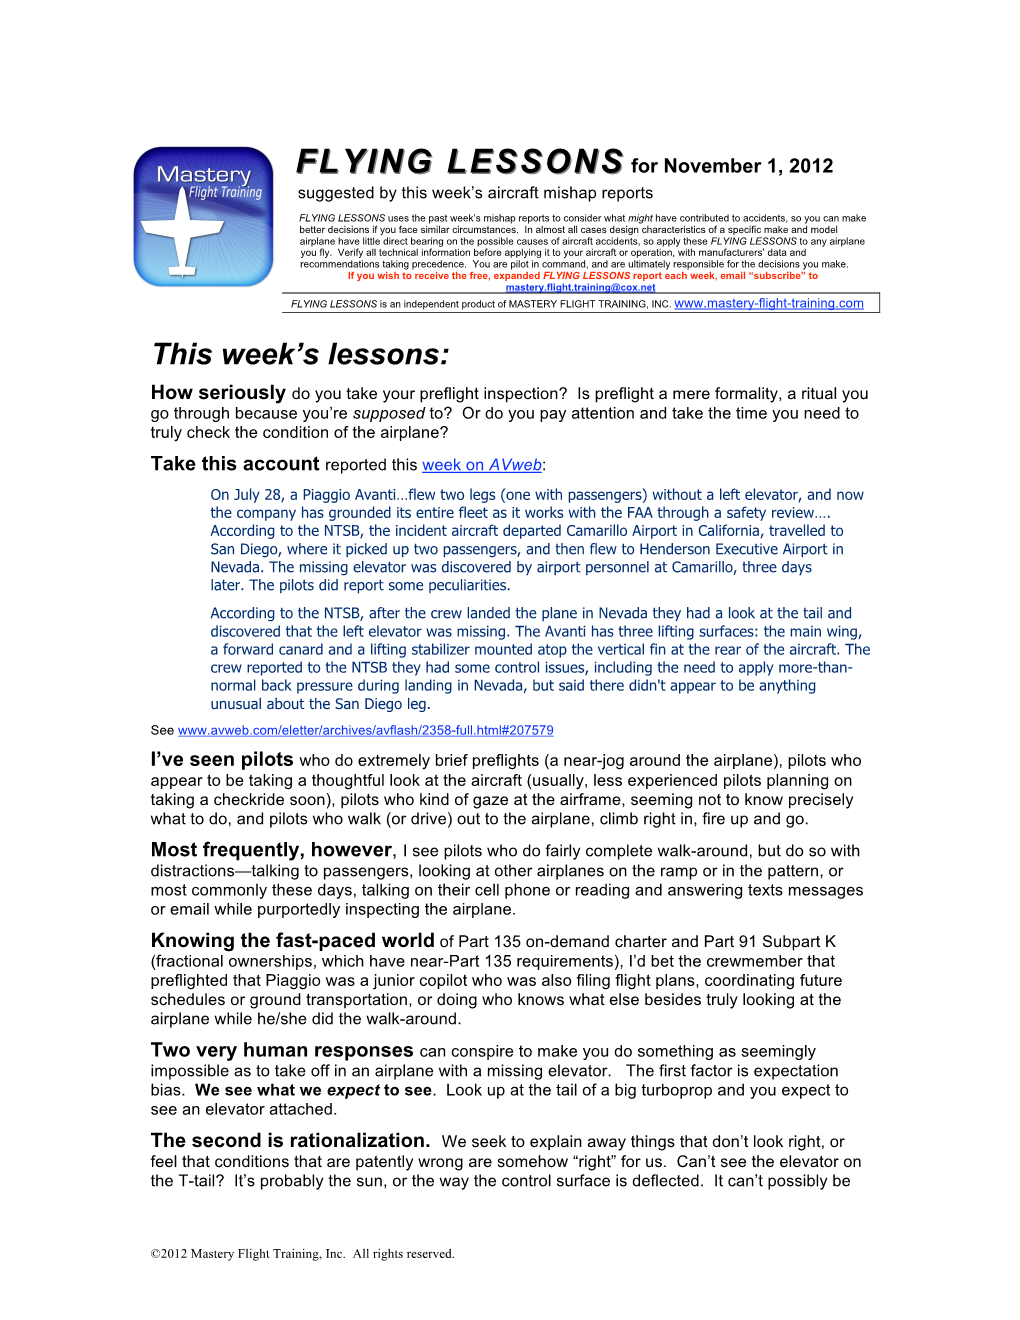 FLYING LESSONS for November 1, 2012 Suggested by This Week’S Aircraft Mishap Reports